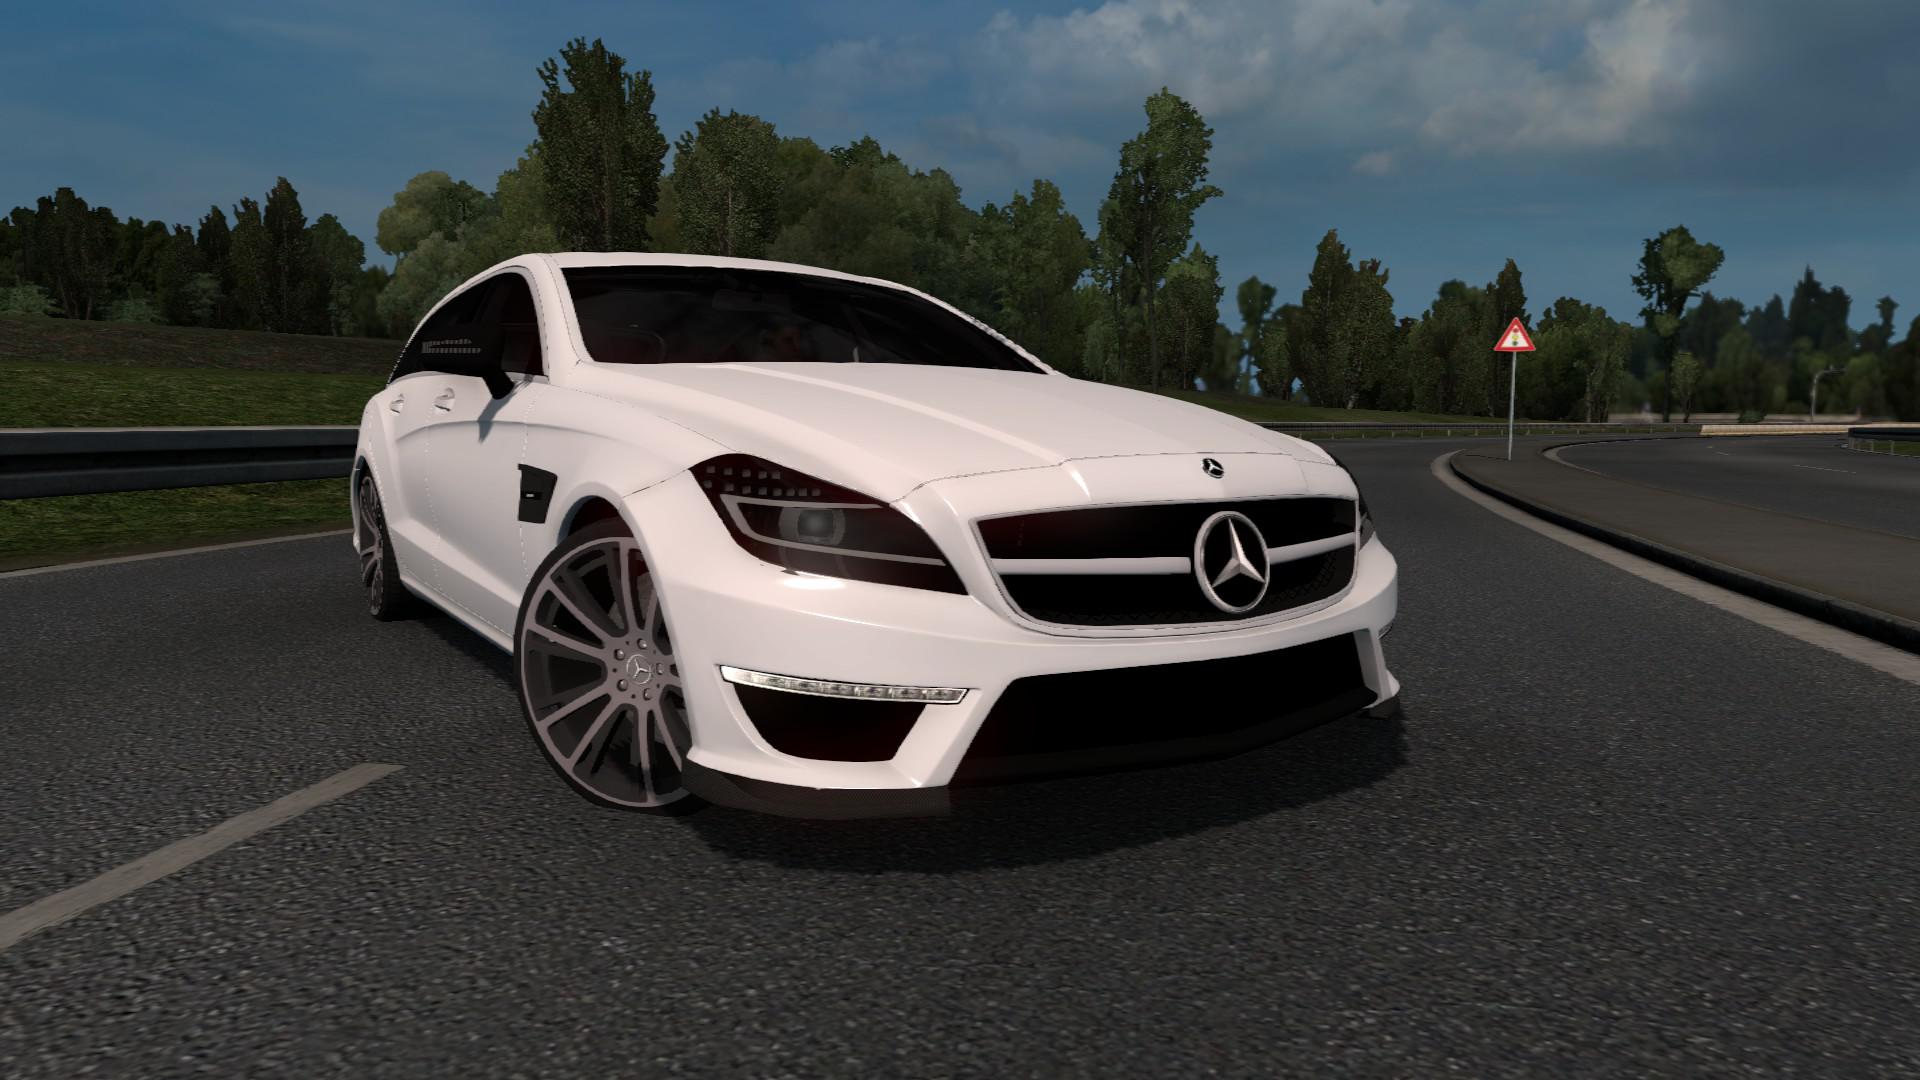 Beamng mod mercedes. Мерседес ЦЛС 63 АМГ етс 2. Mercedes CLS 63 AMG shooting Brake. ETS 2 Mercedes cls63. CLS 2.